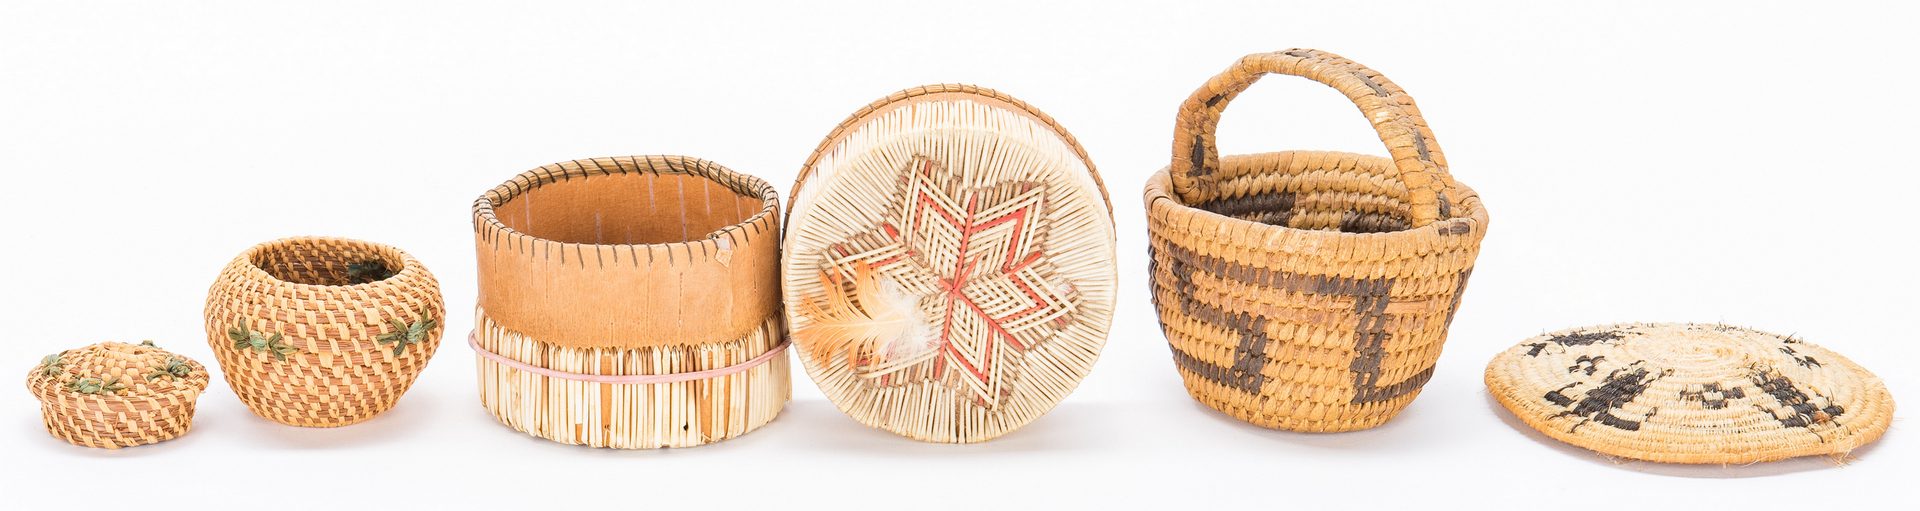 Lot 269: 19 Assorted Native American Baskets